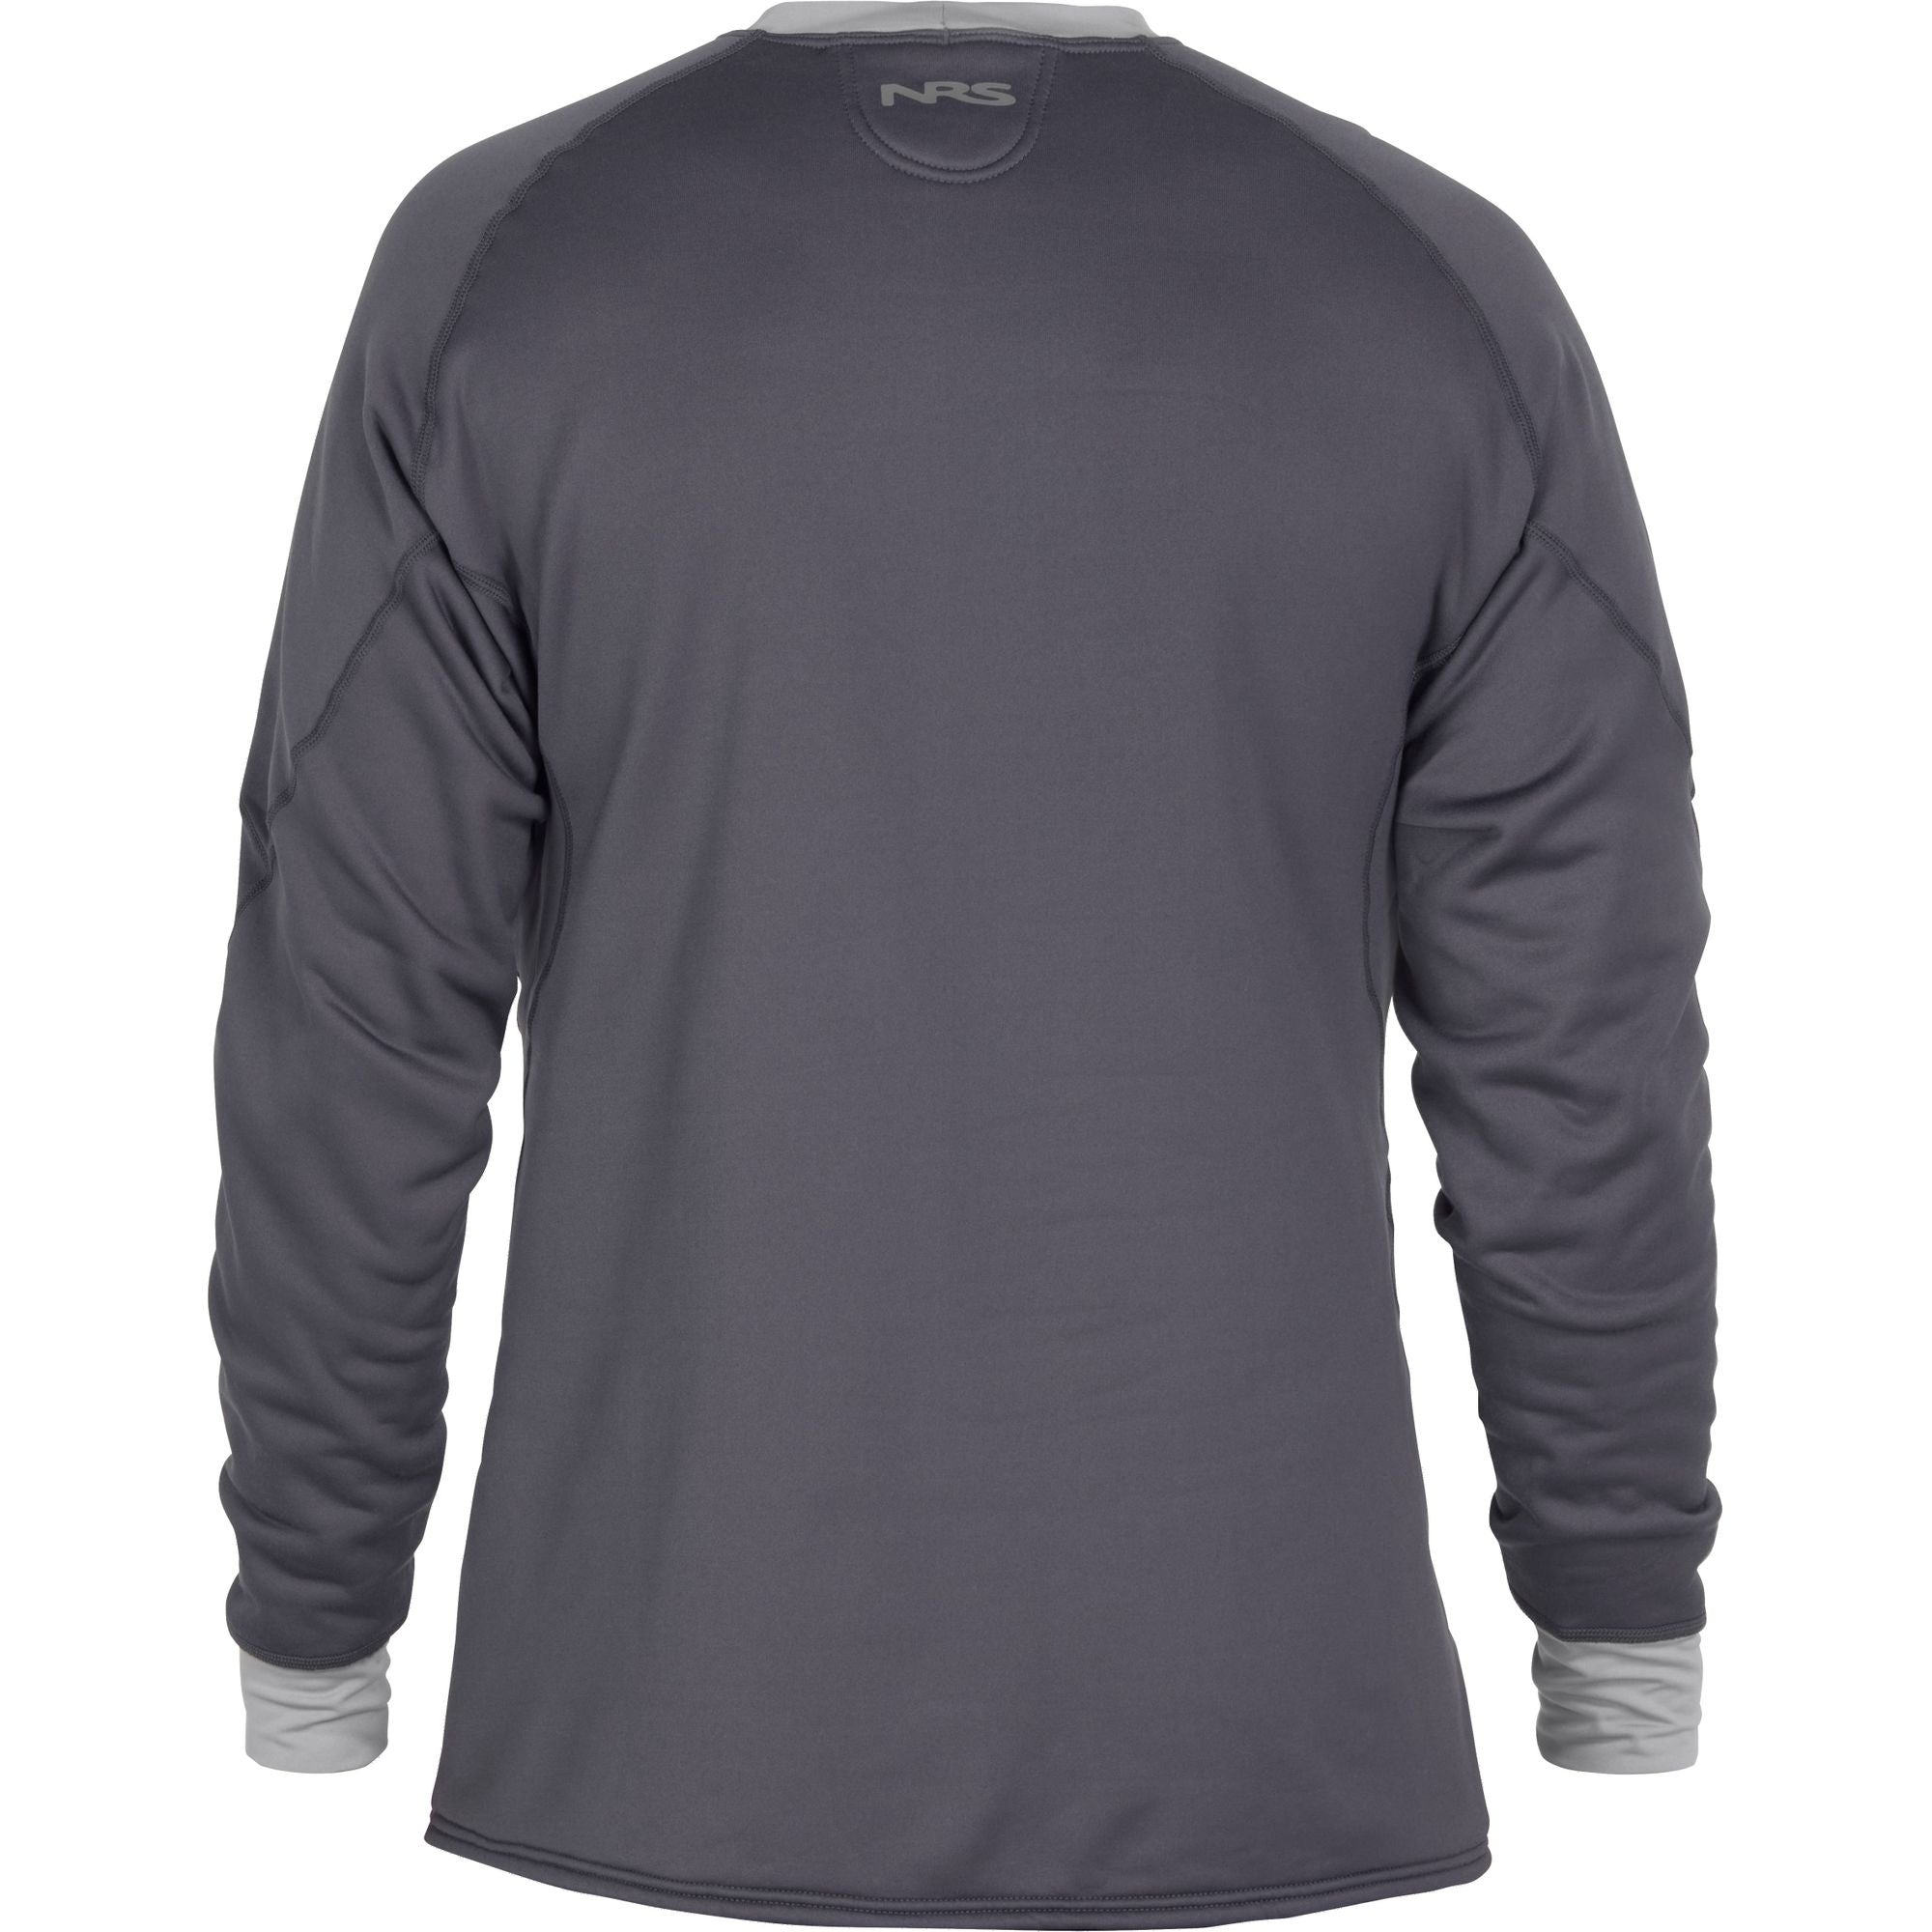 NRS - Expedition Weight Shirt Men's